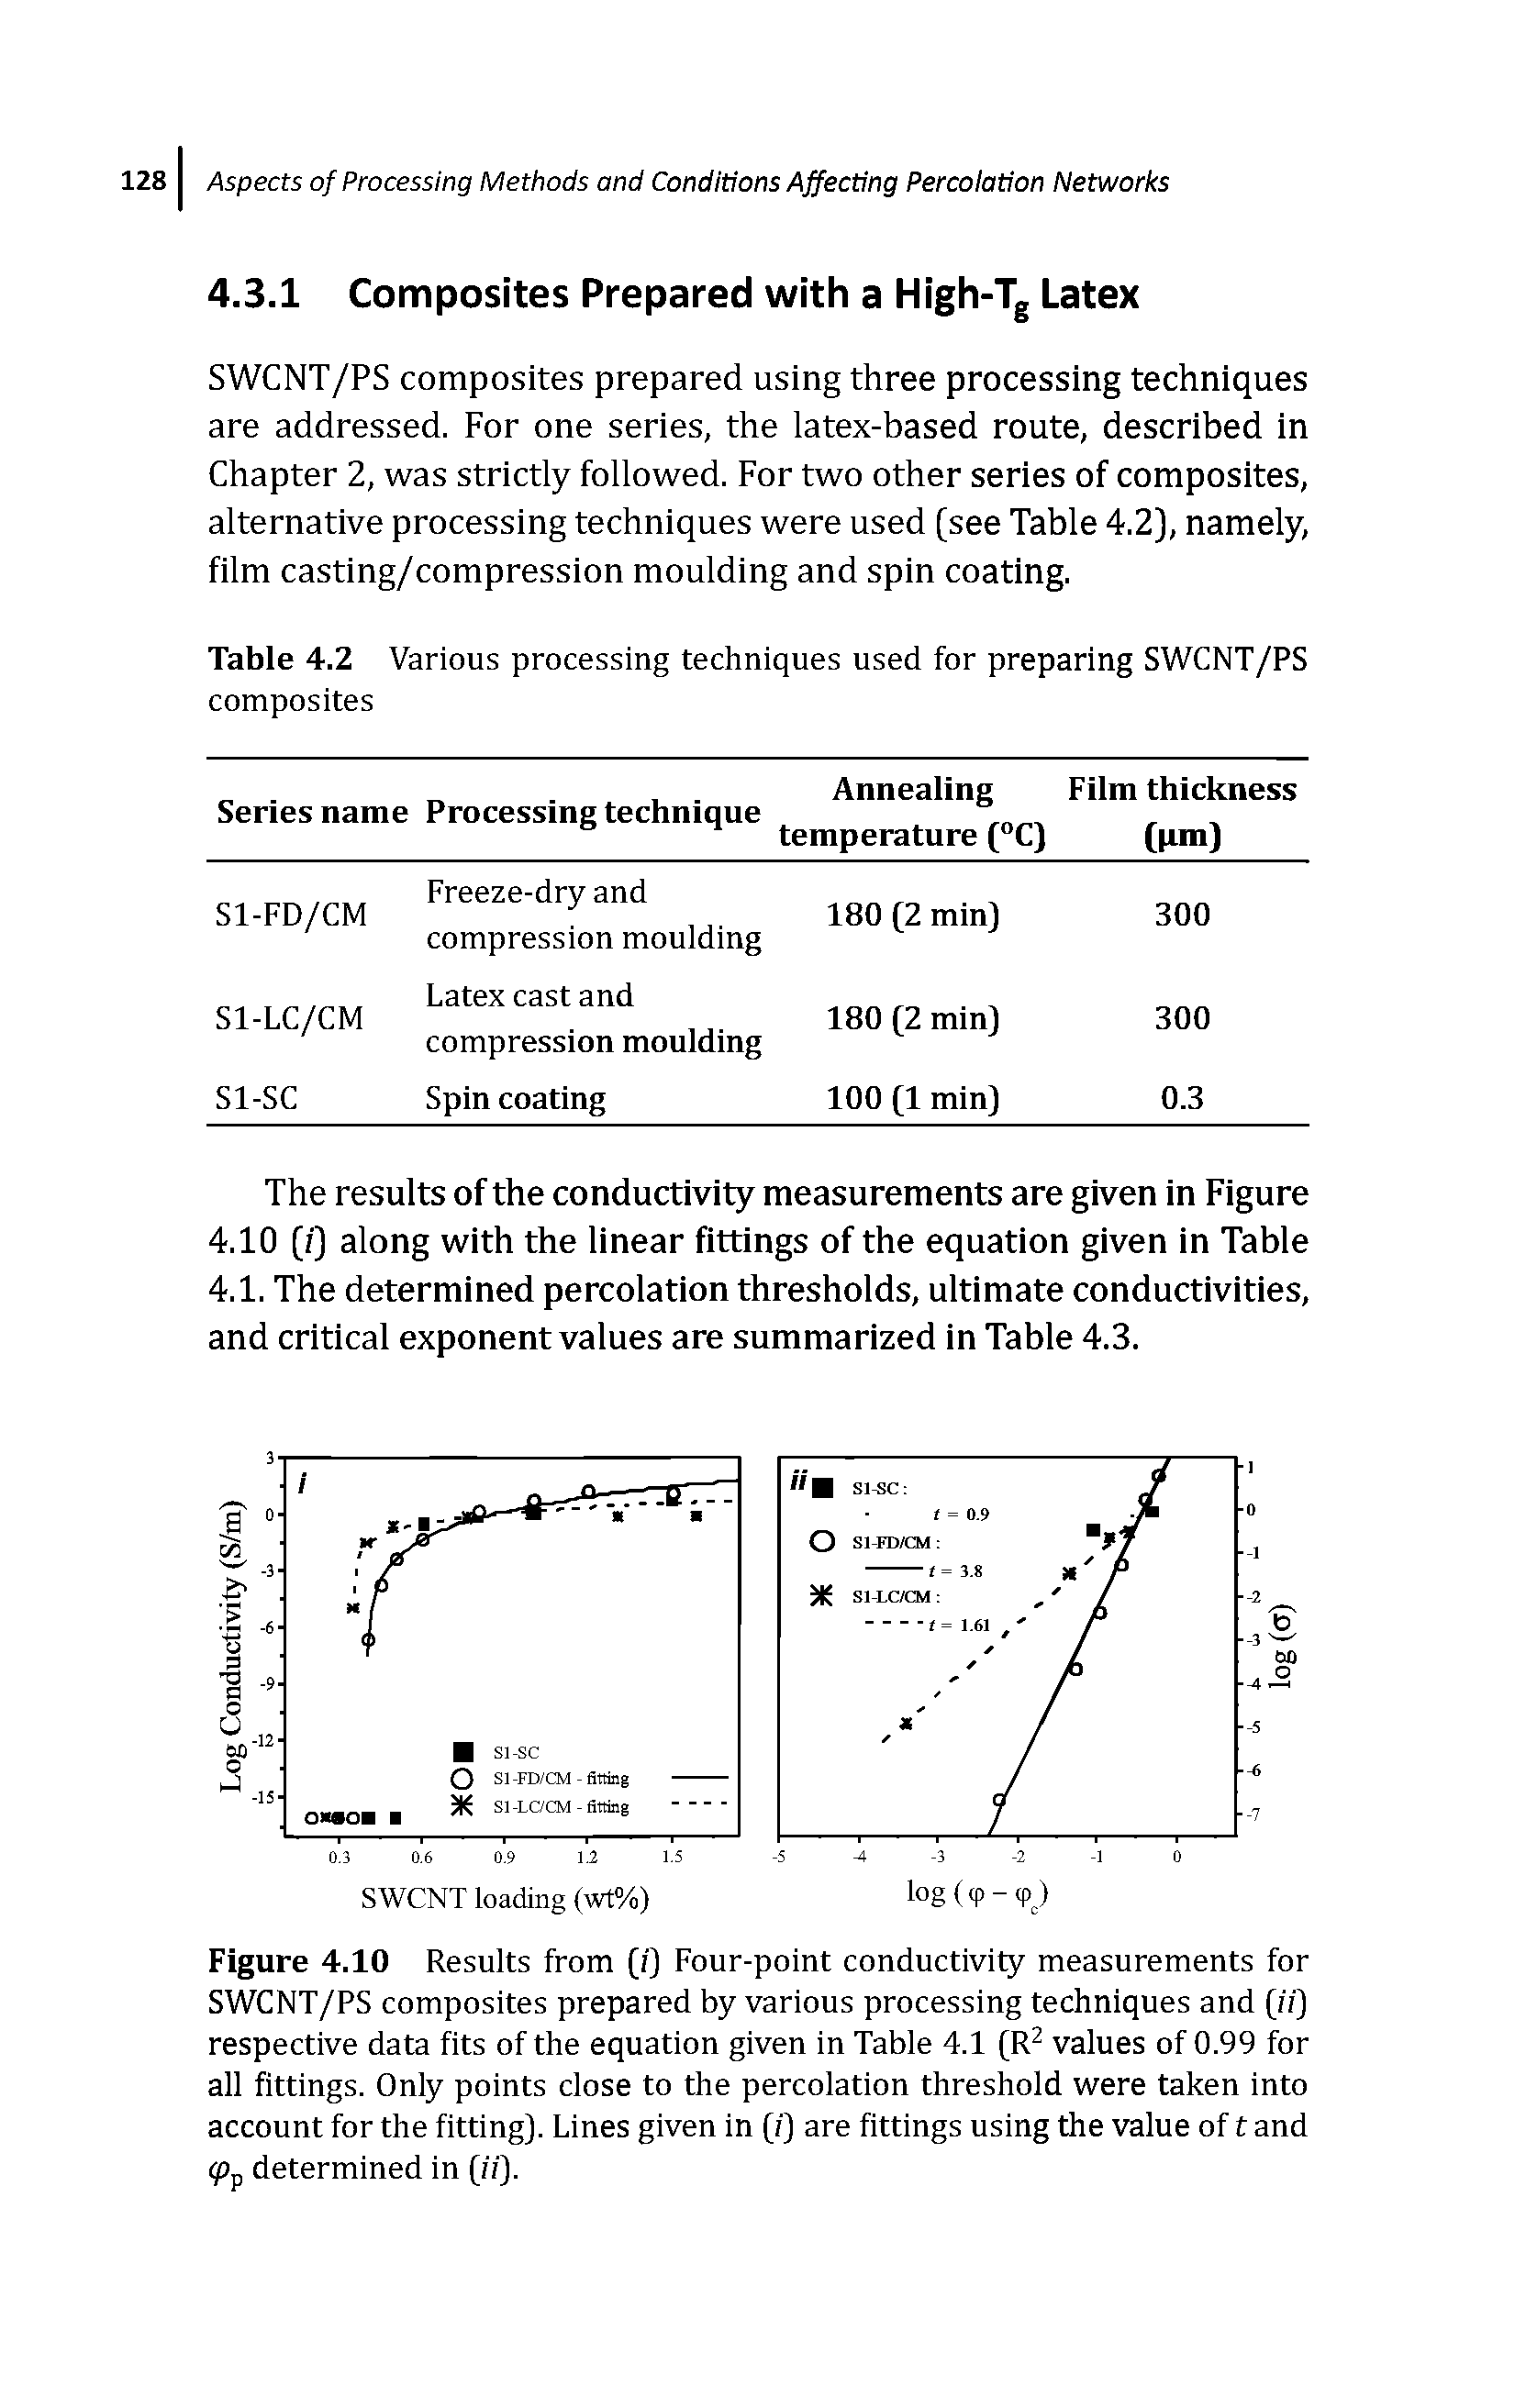 Figure 4.10 Results from [i) Four-point conductivity measurements for SWCNT/PS composites prepared by various processing techniques and ii) respective data fits of the equation given in Table 4.1 (R values of 0.99 for all fittings. Only points close to the percolation threshold were taken into account for the fitting). Lines given in (i) are fittings using the value of t and (pp determined in (//).